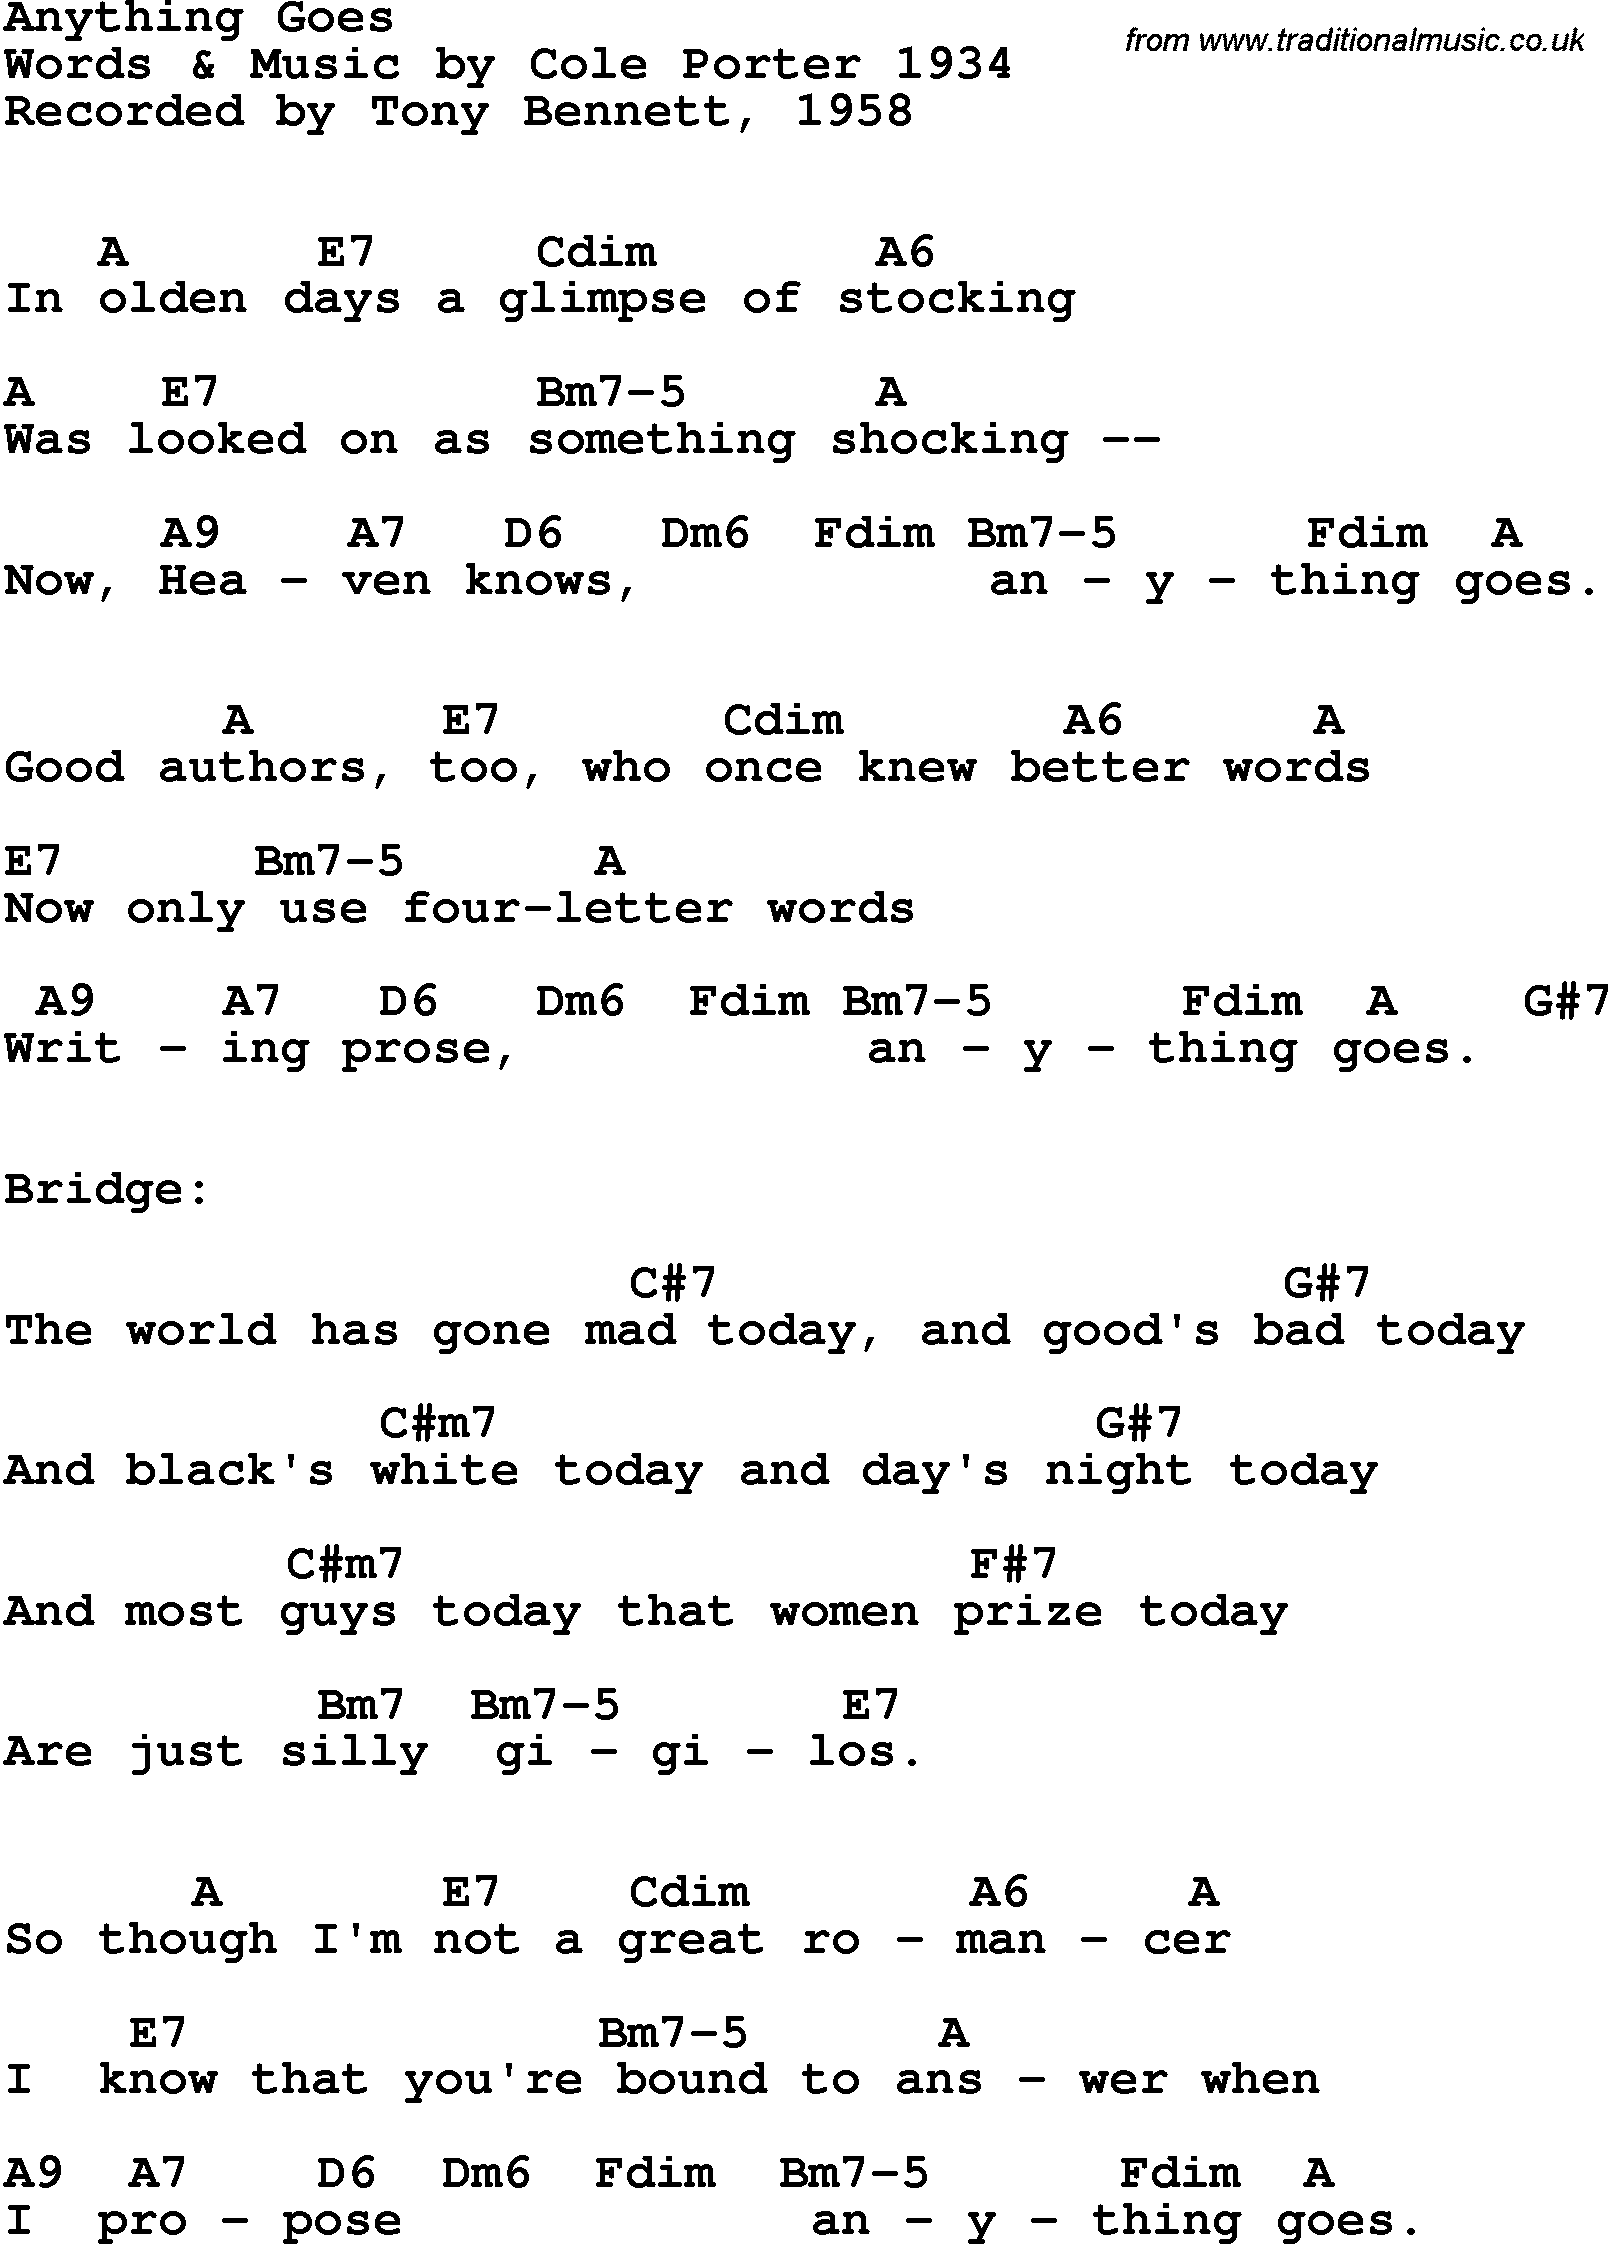 Song Lyrics with guitar chords for Anything Goes - Tony Bennett, 1958